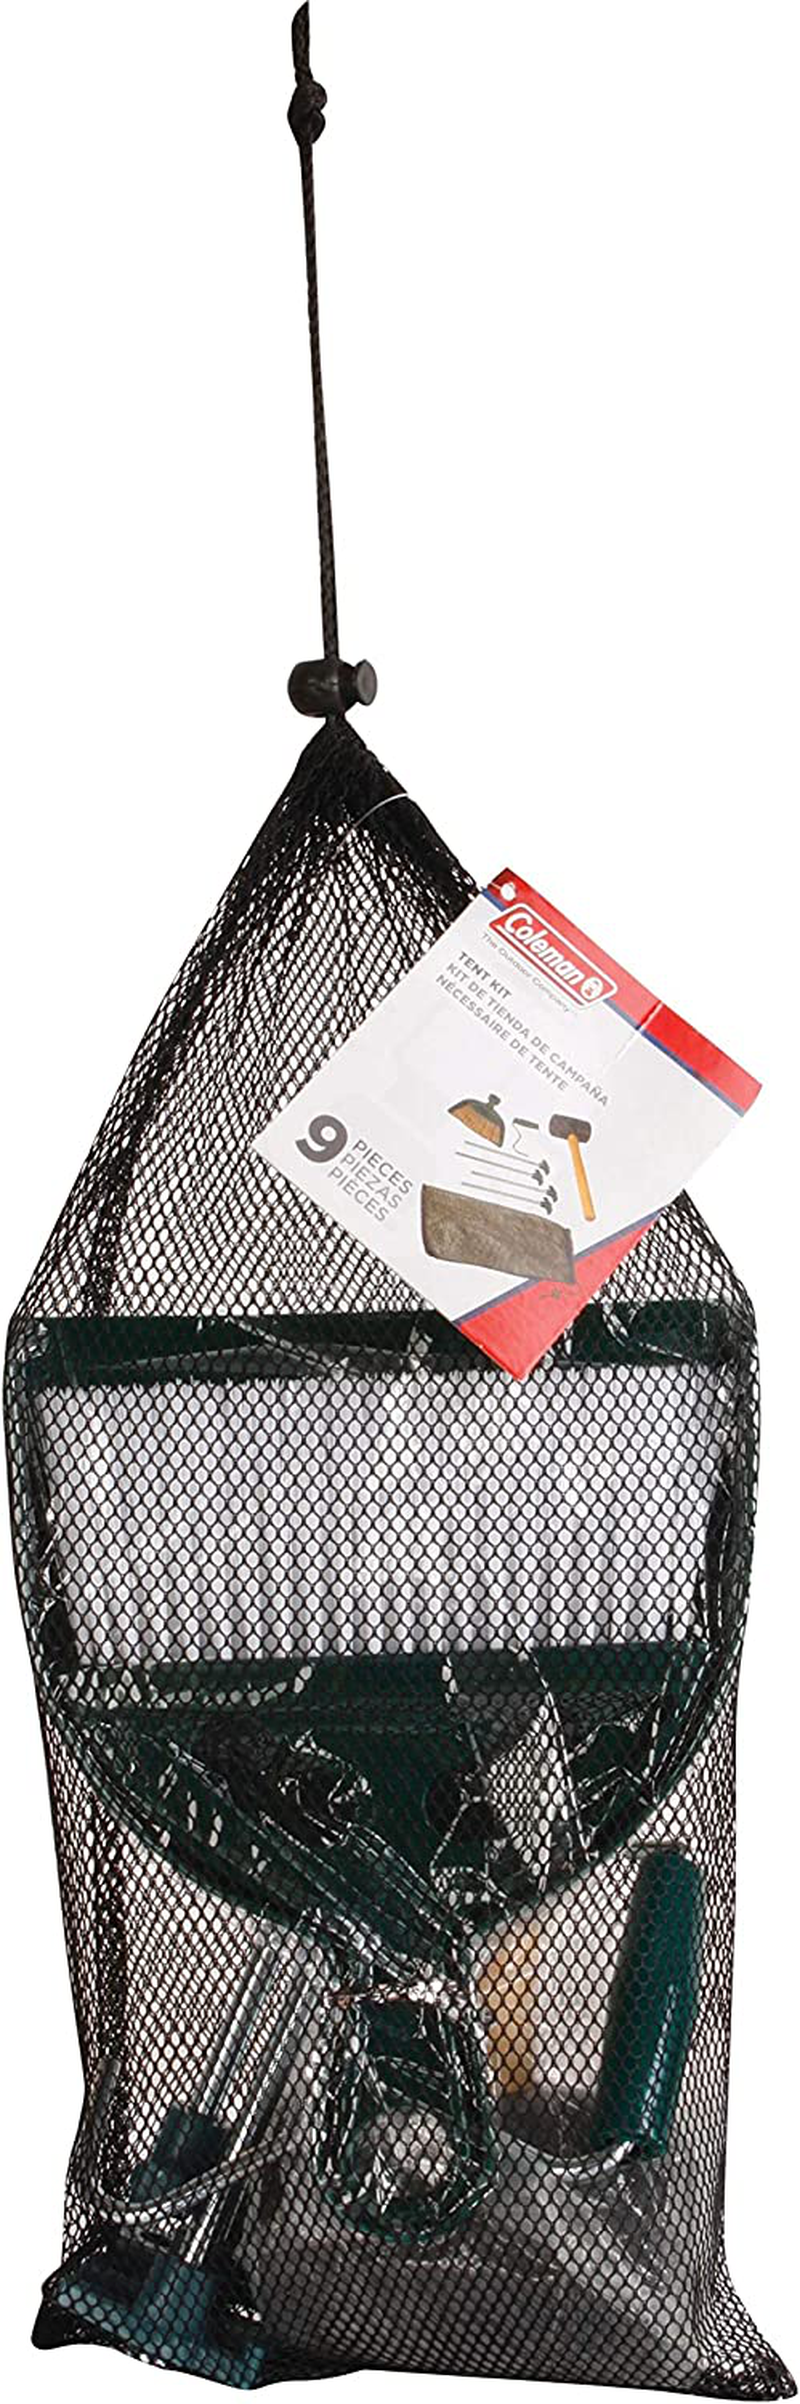 Coleman Tent Kit Sporting Goods > Outdoor Recreation > Camping & Hiking > Camping Tools Coleman   